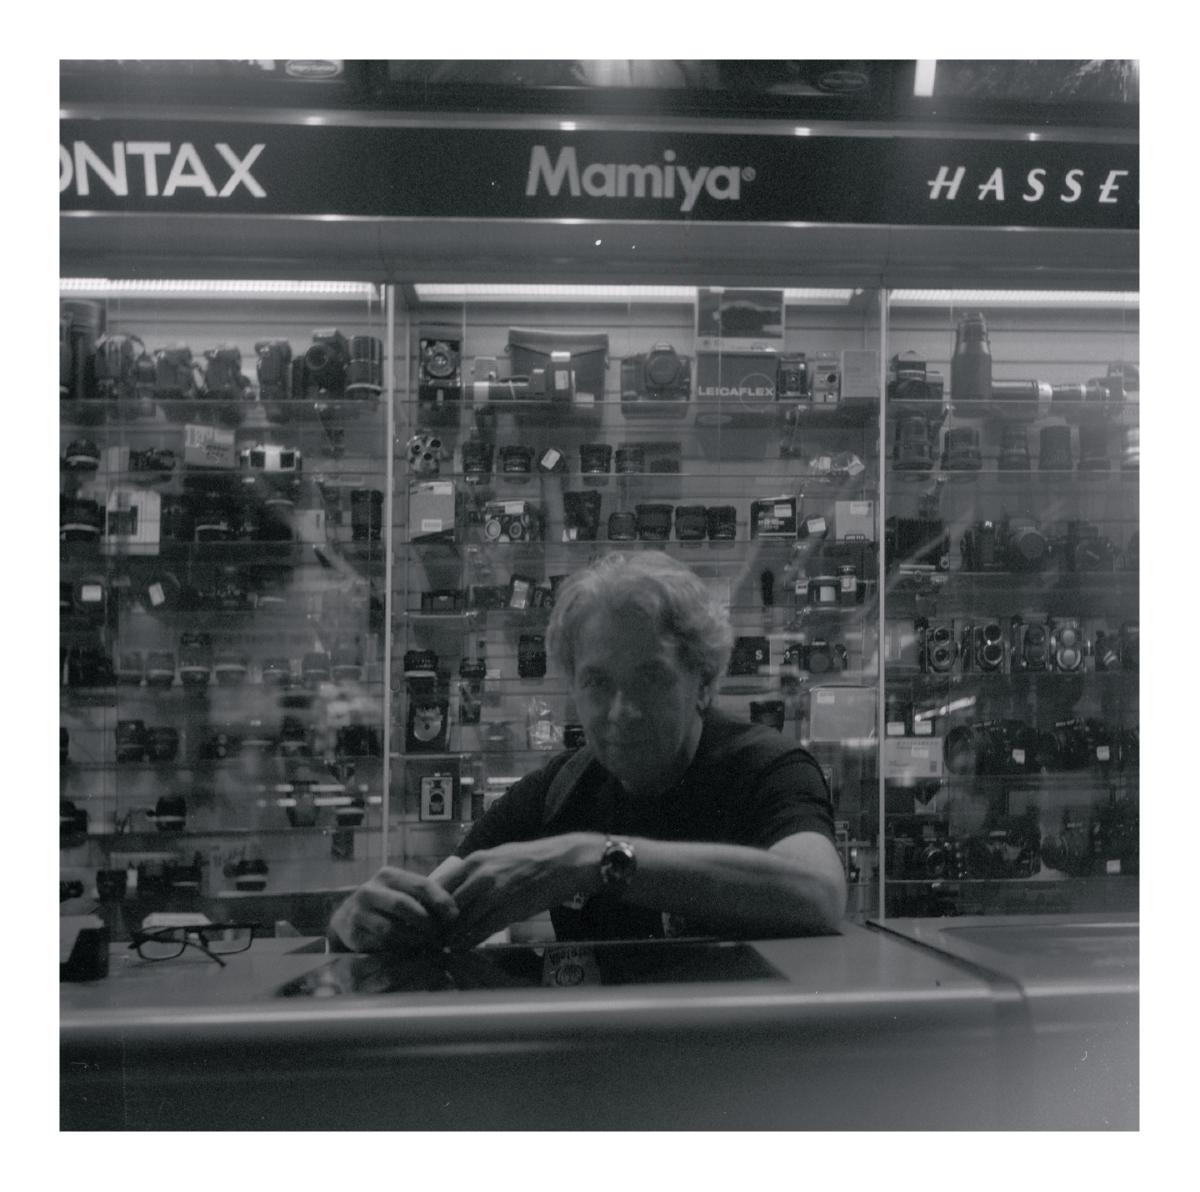 A person is sitting at a desk with their arms on the desk smiling at the camera. Behind them is shelves with rows and rows of film cameras. Some Brands are visible in the background Mamiya being the only one not cut off, Contax and Hasseblad logos are partially visible.